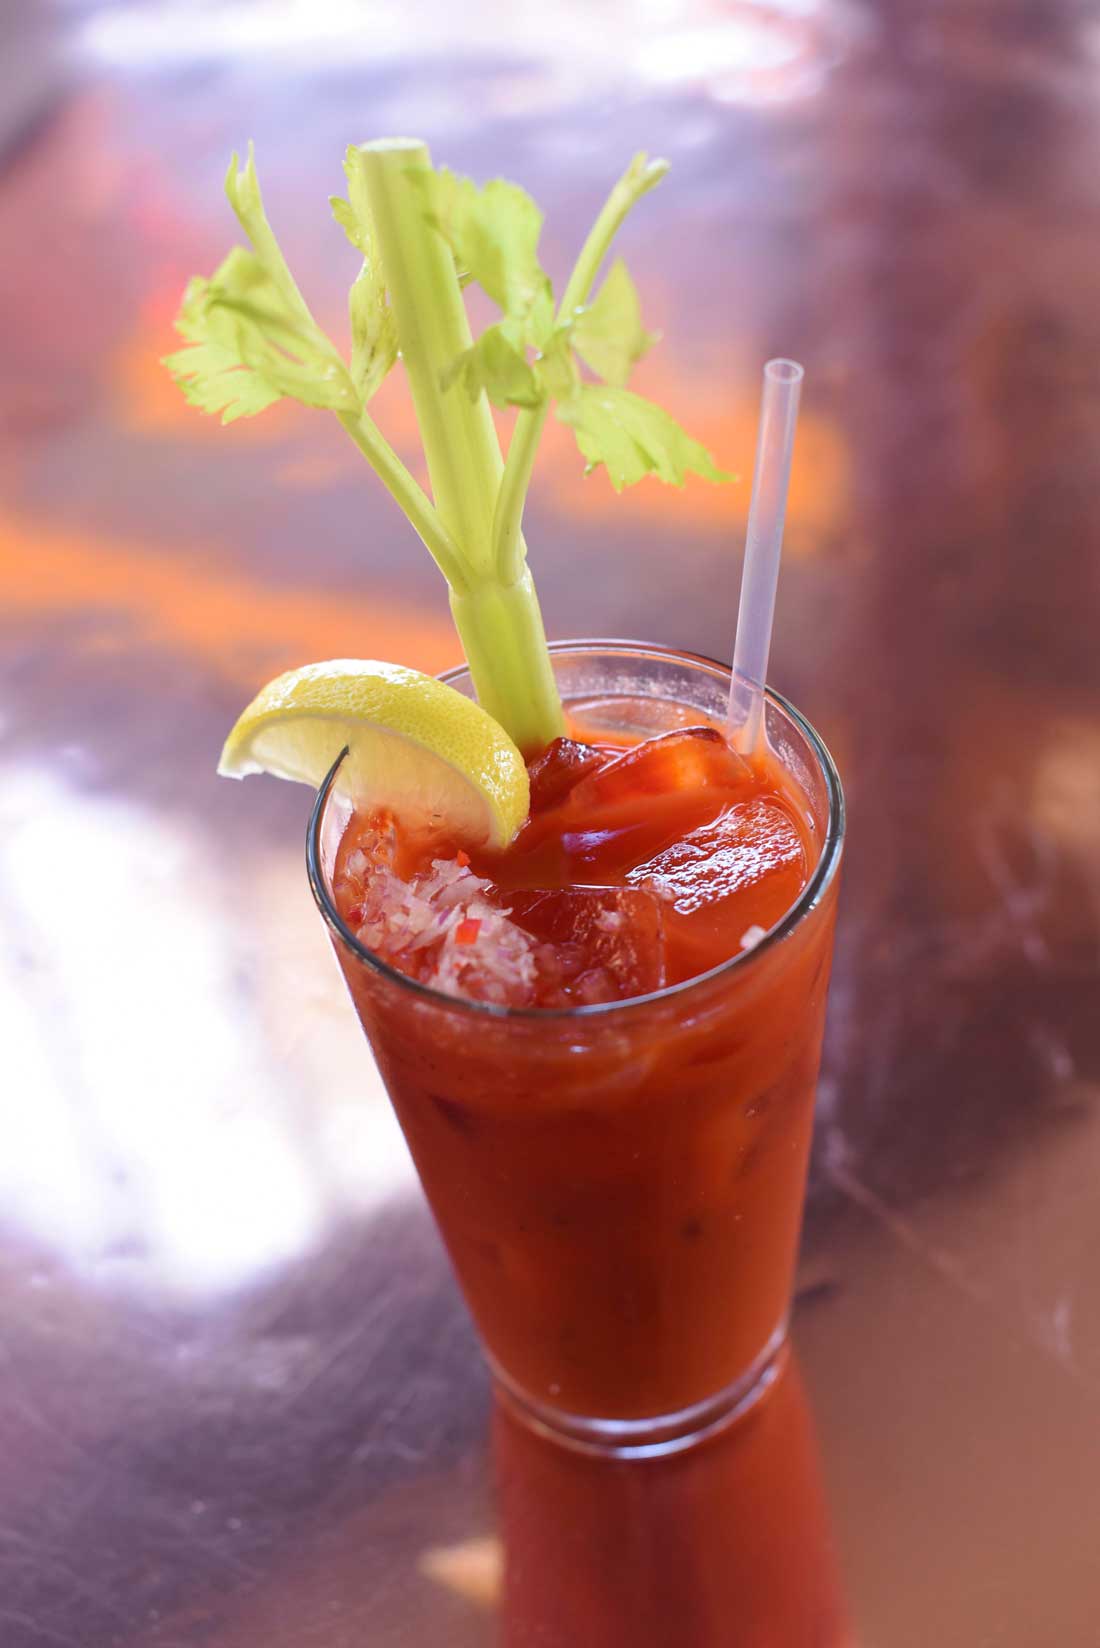 The Zuni Café Bloody Mary may seem simple, but the flavors are anything but.